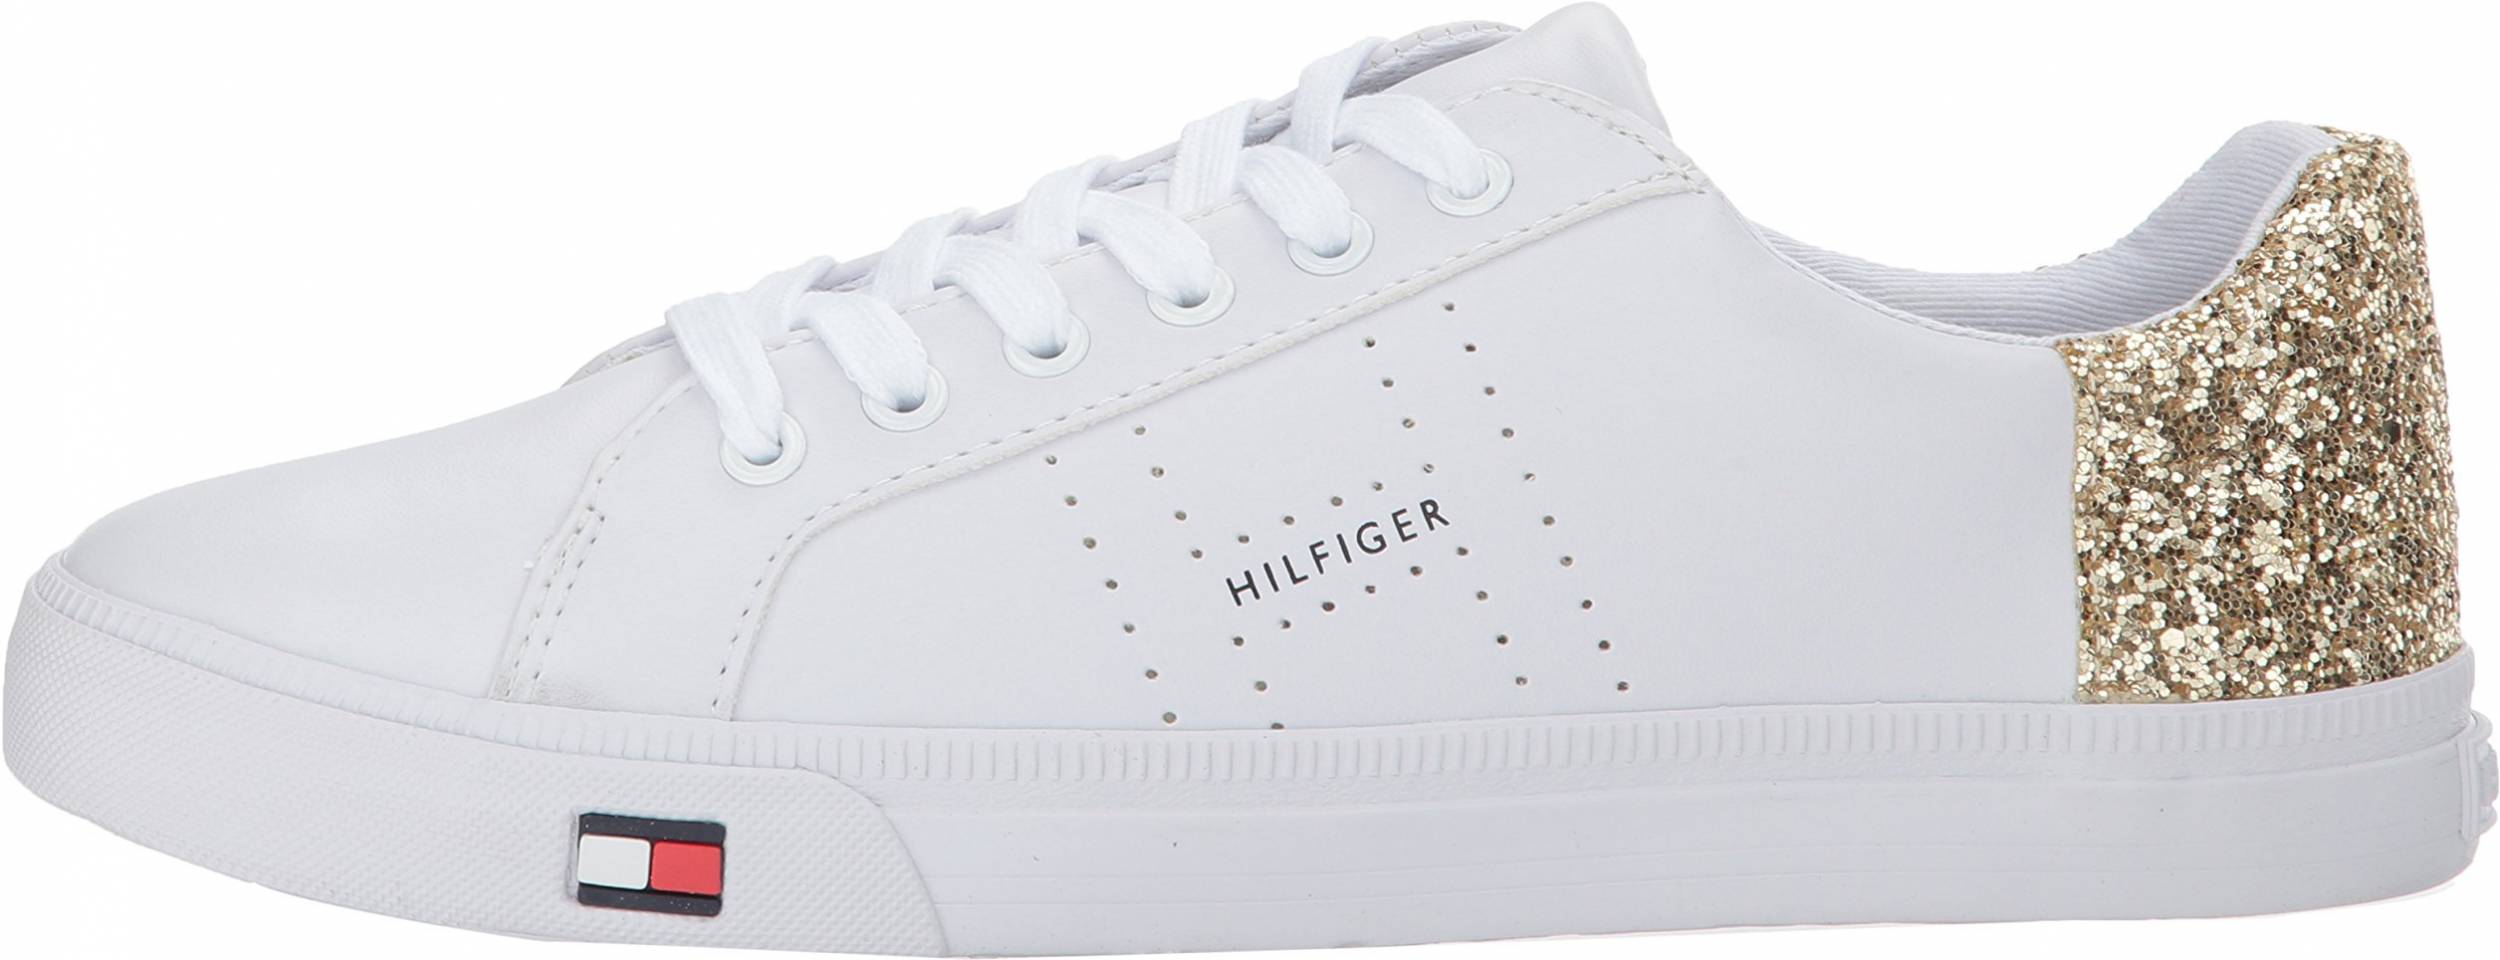 Tommy Hilfiger Lune sneakers in white 